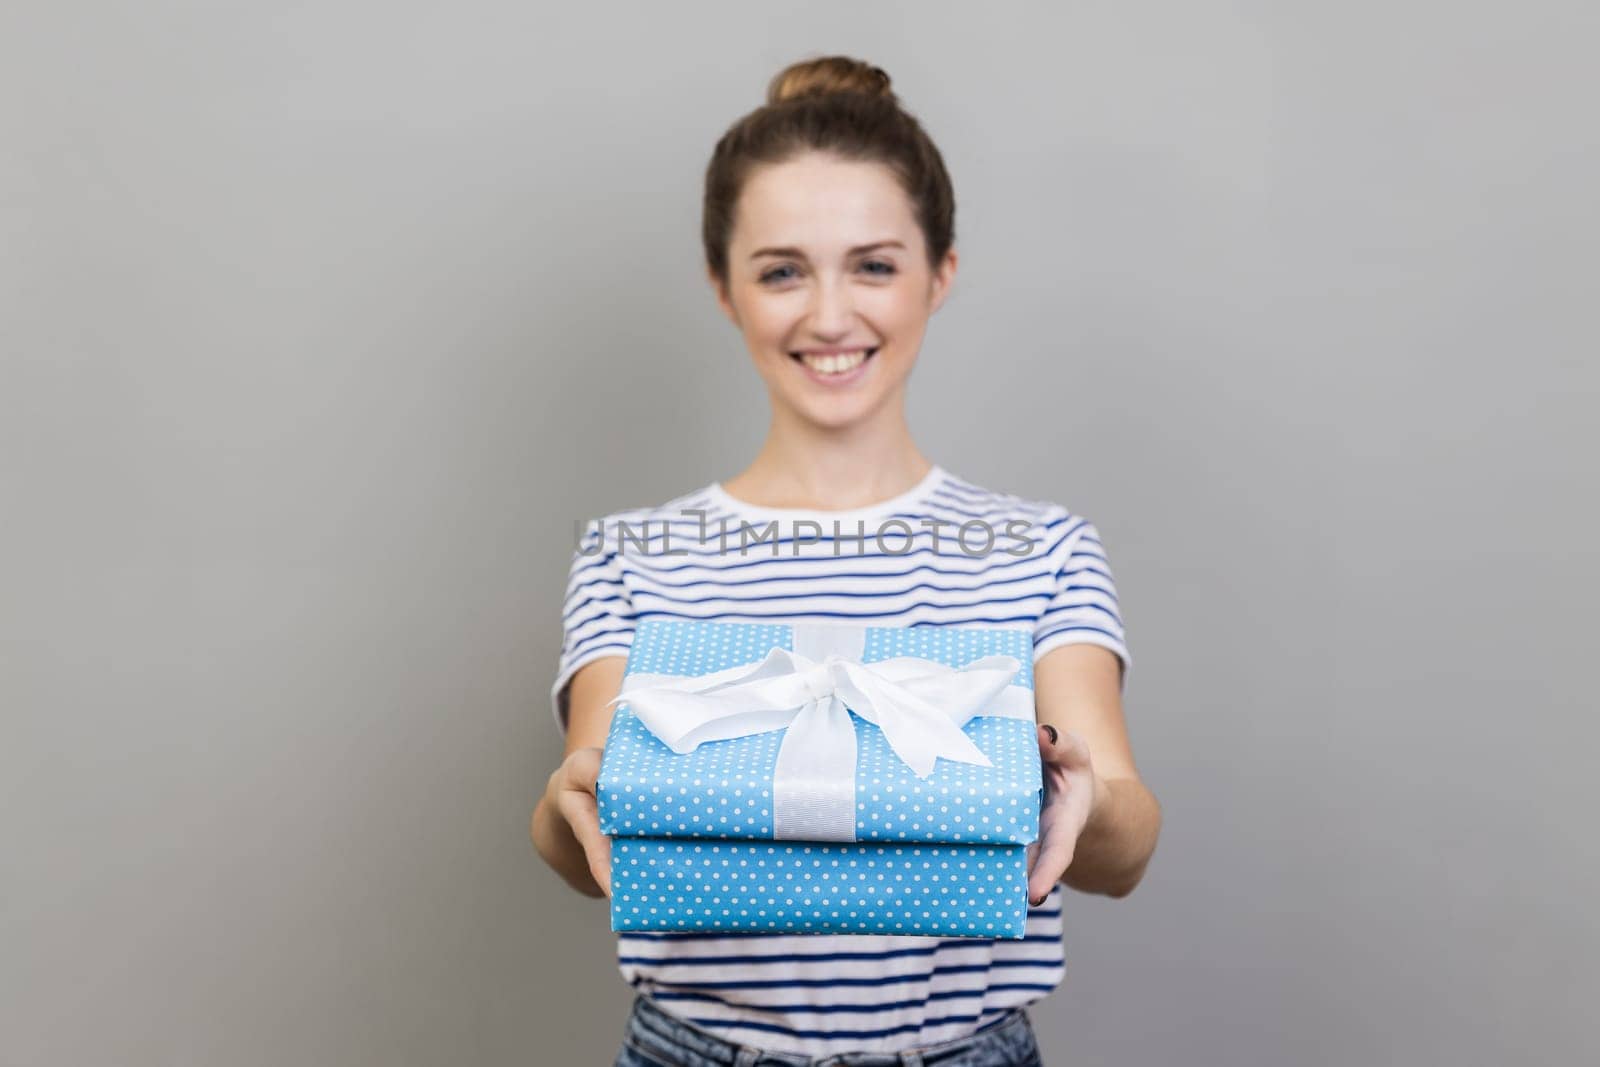 Woman holding out present box, giving gift, looking at camera with optimistic expression, greeting. by Khosro1